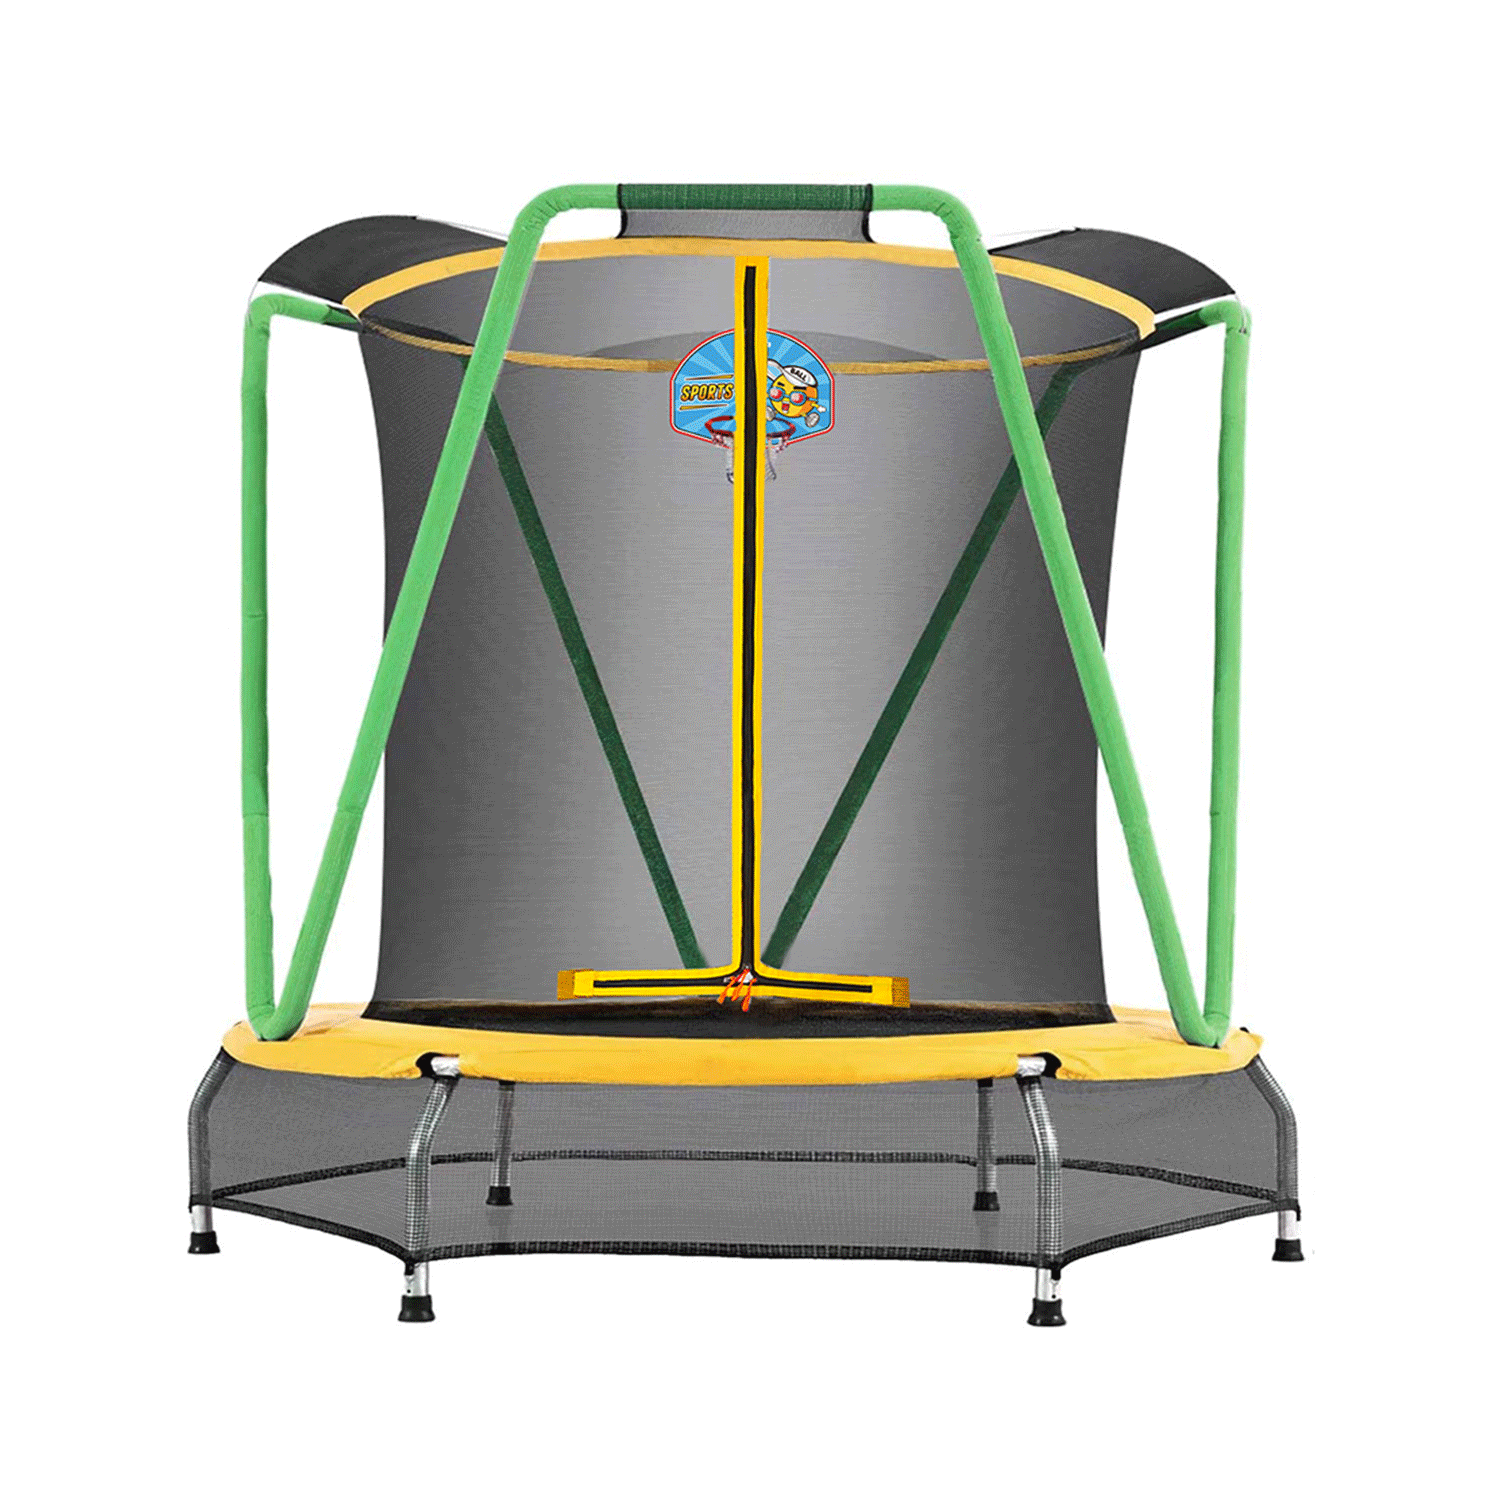 Zupapa Small Trampolines with Basketball Hoop Indoor Mini Trampoline for Toddlers Kids Children Ultra Quiet Age 2-8 54'' 66''